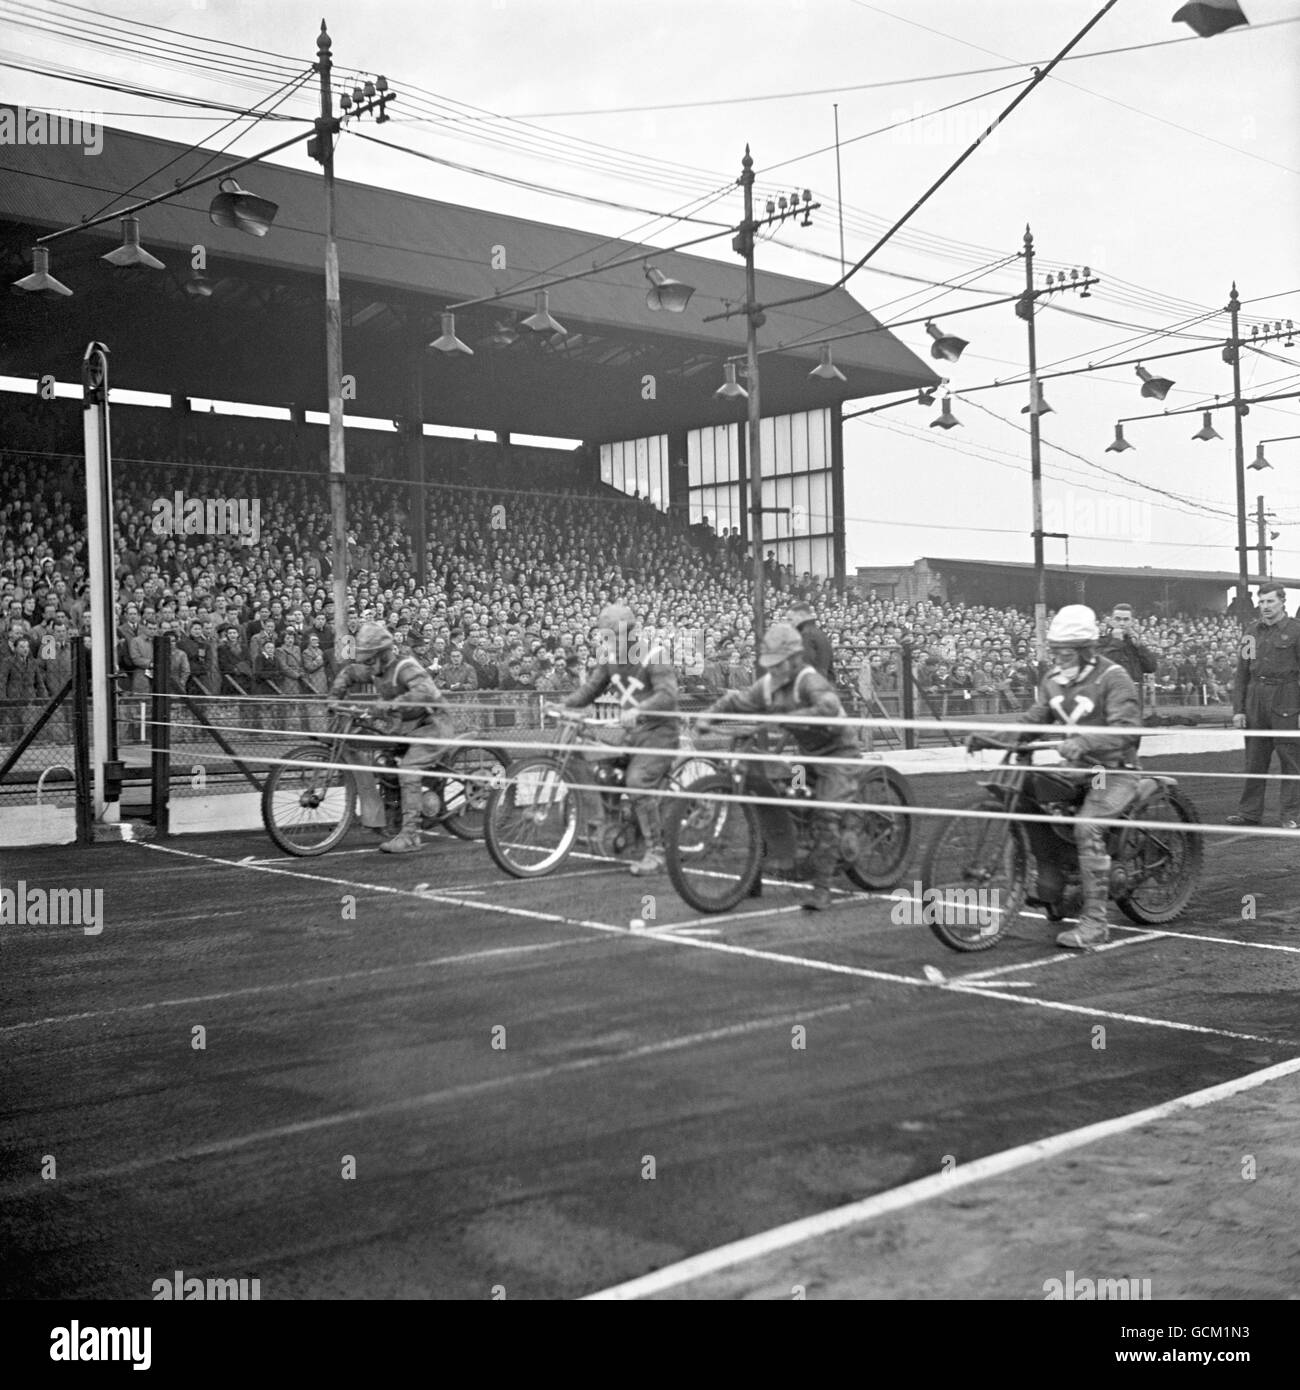 Speedway - New Cross Stadium. The starting gate in position at New Cross speedway track Stock Photo